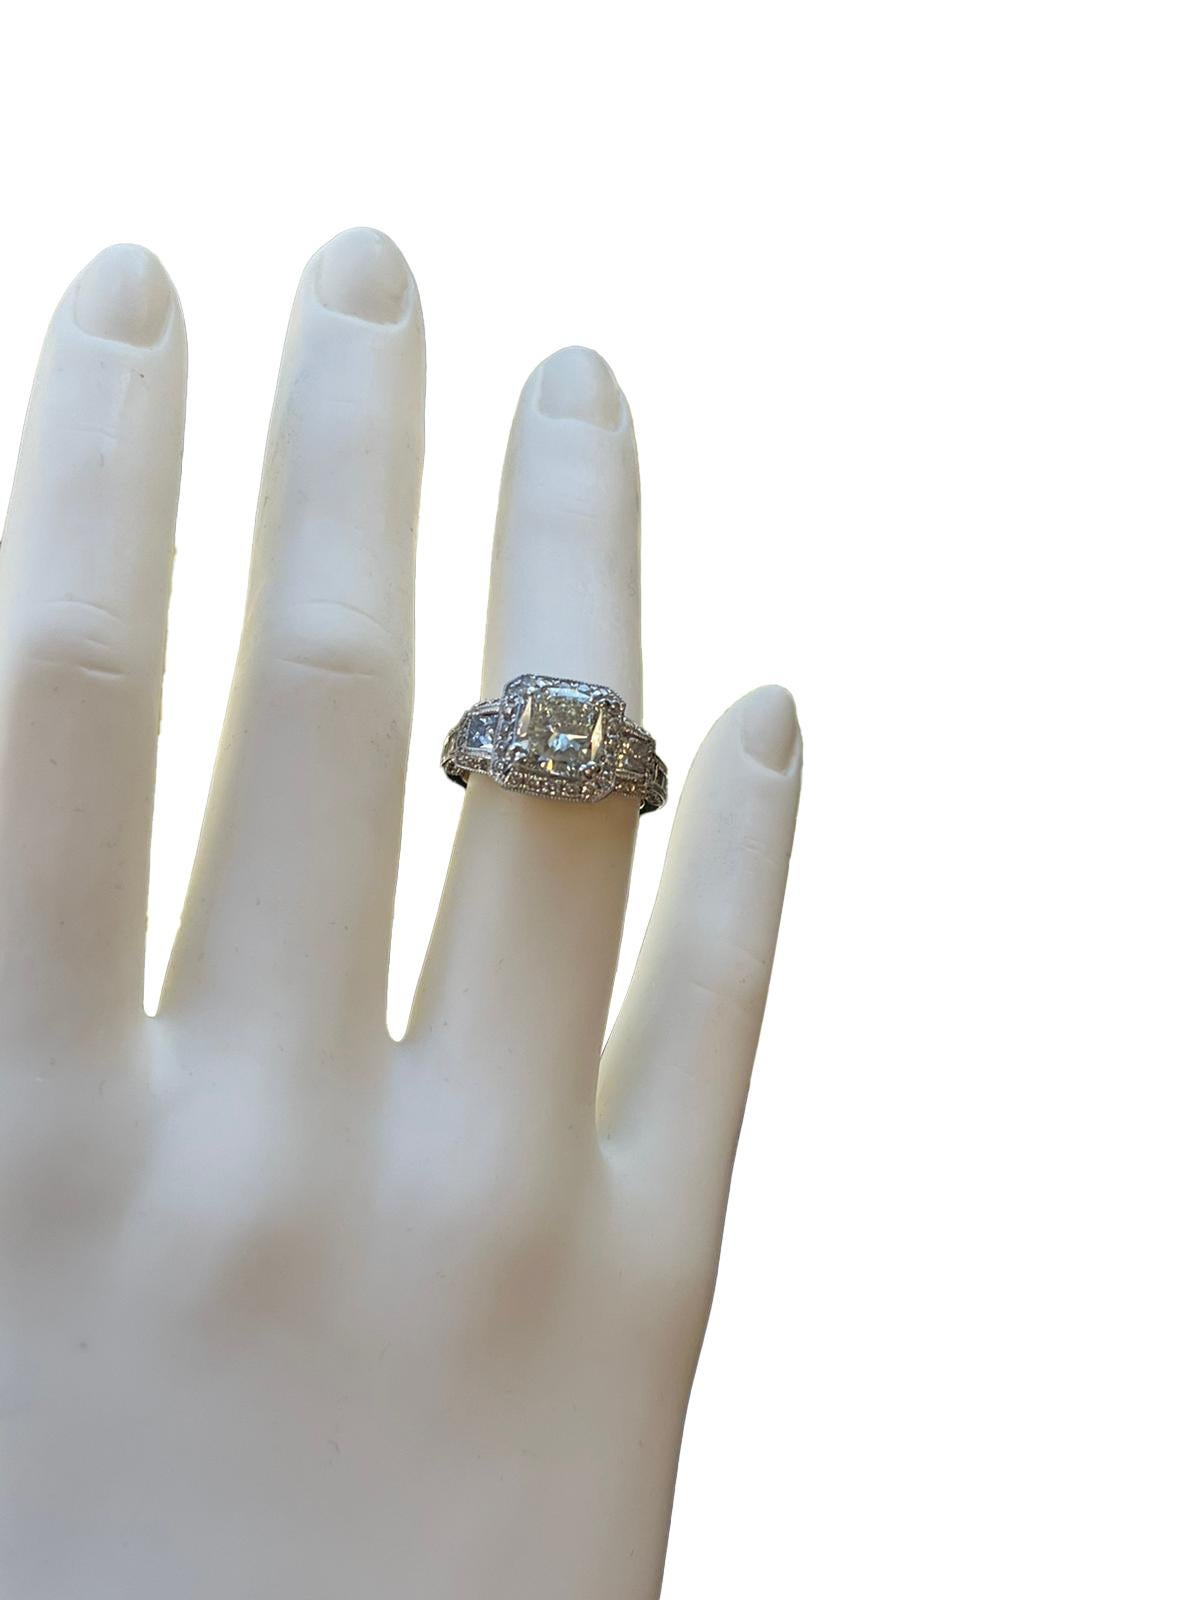 Exceptional GIA Graded 2.02 Carat Cushion Diamond Ring with 0.68ct Pave 14k Gold For Sale 2